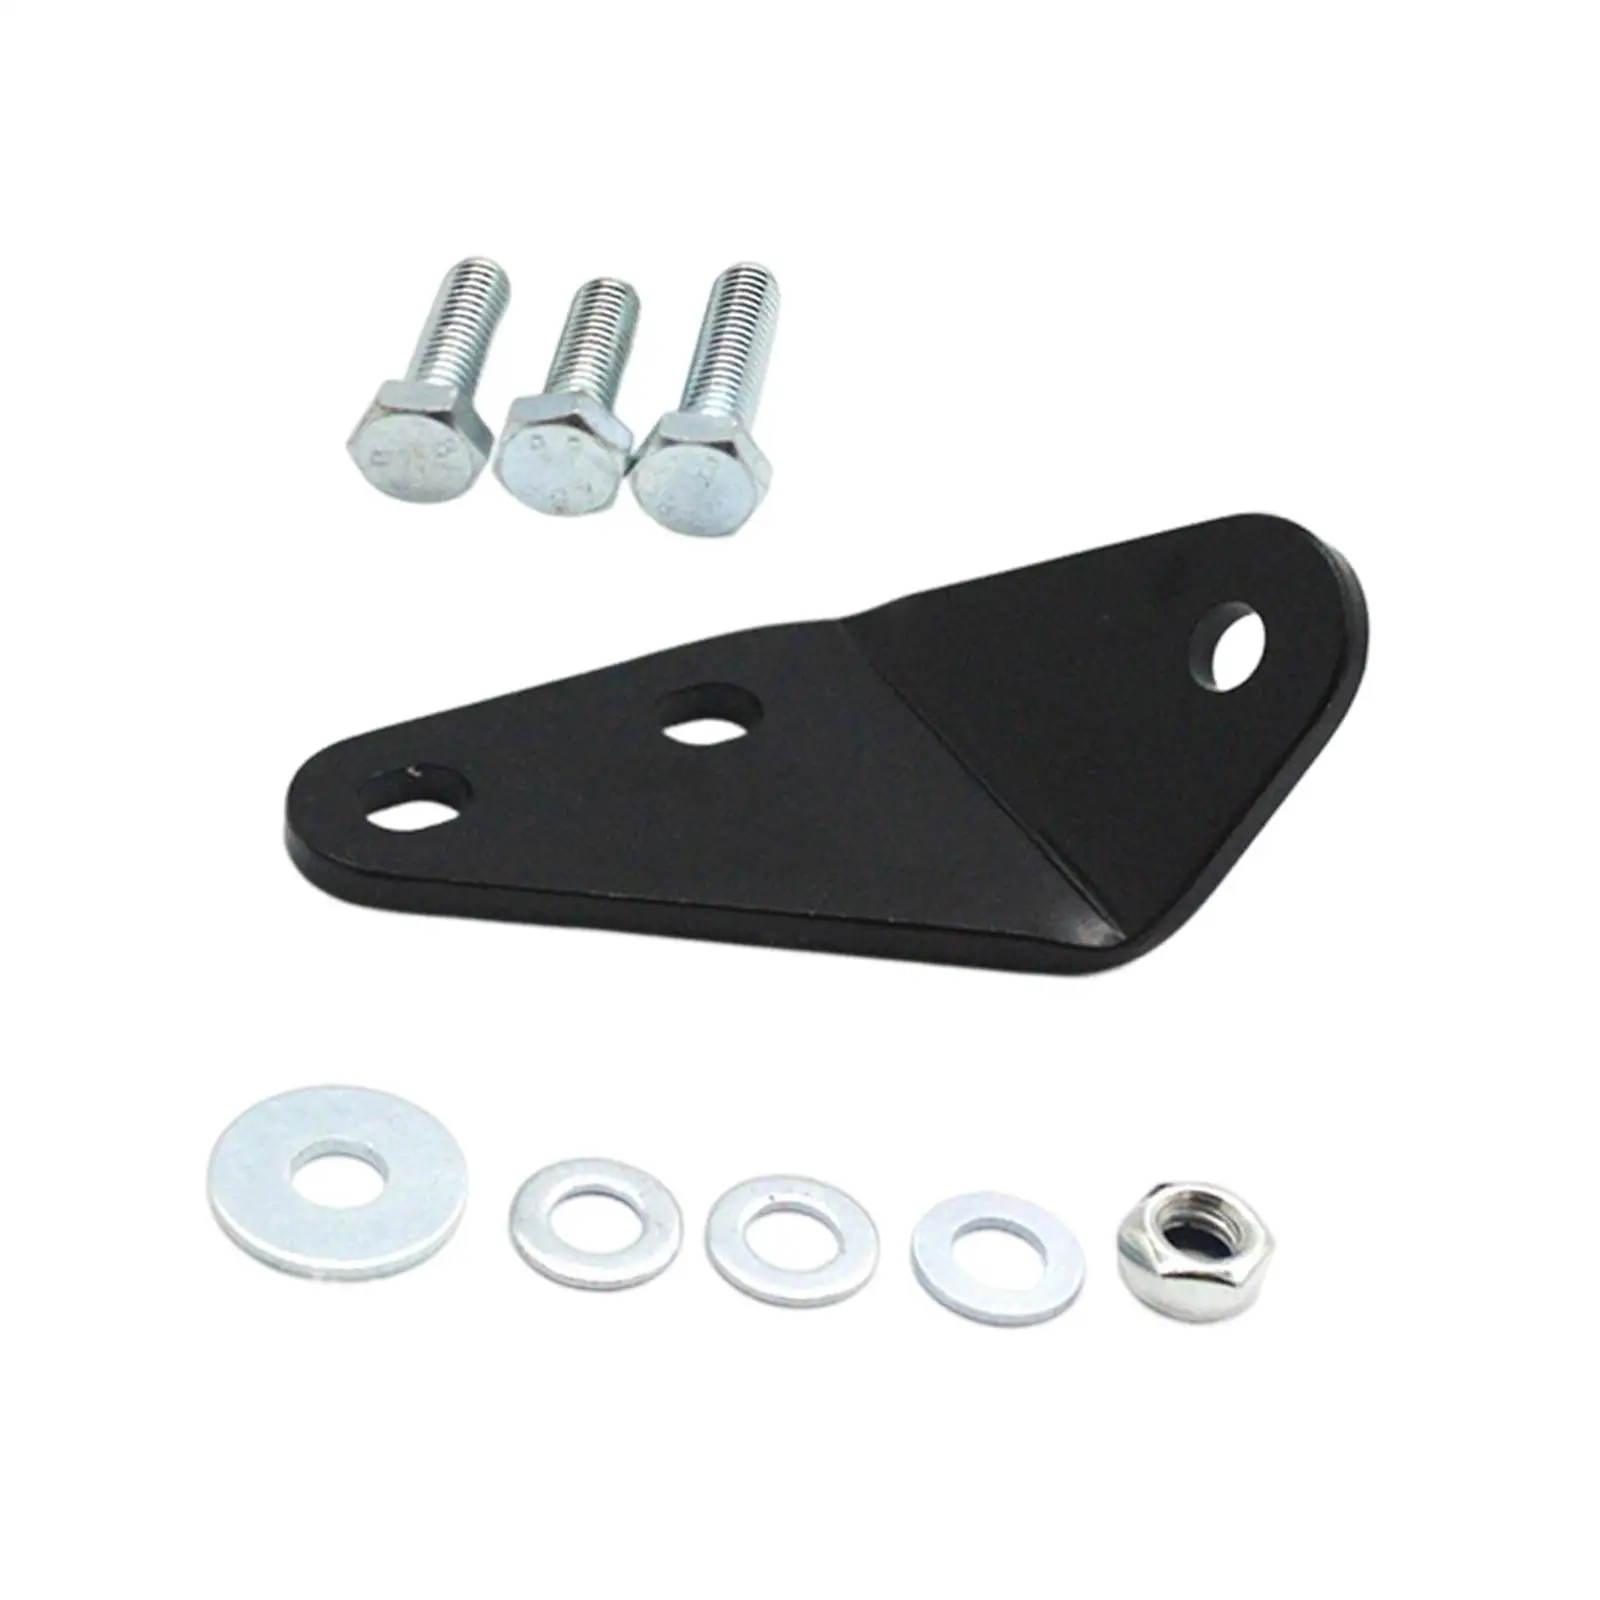 Clutch Pedal Repair Bracket Easy Installation Metal Sturdy Replacement Parts for